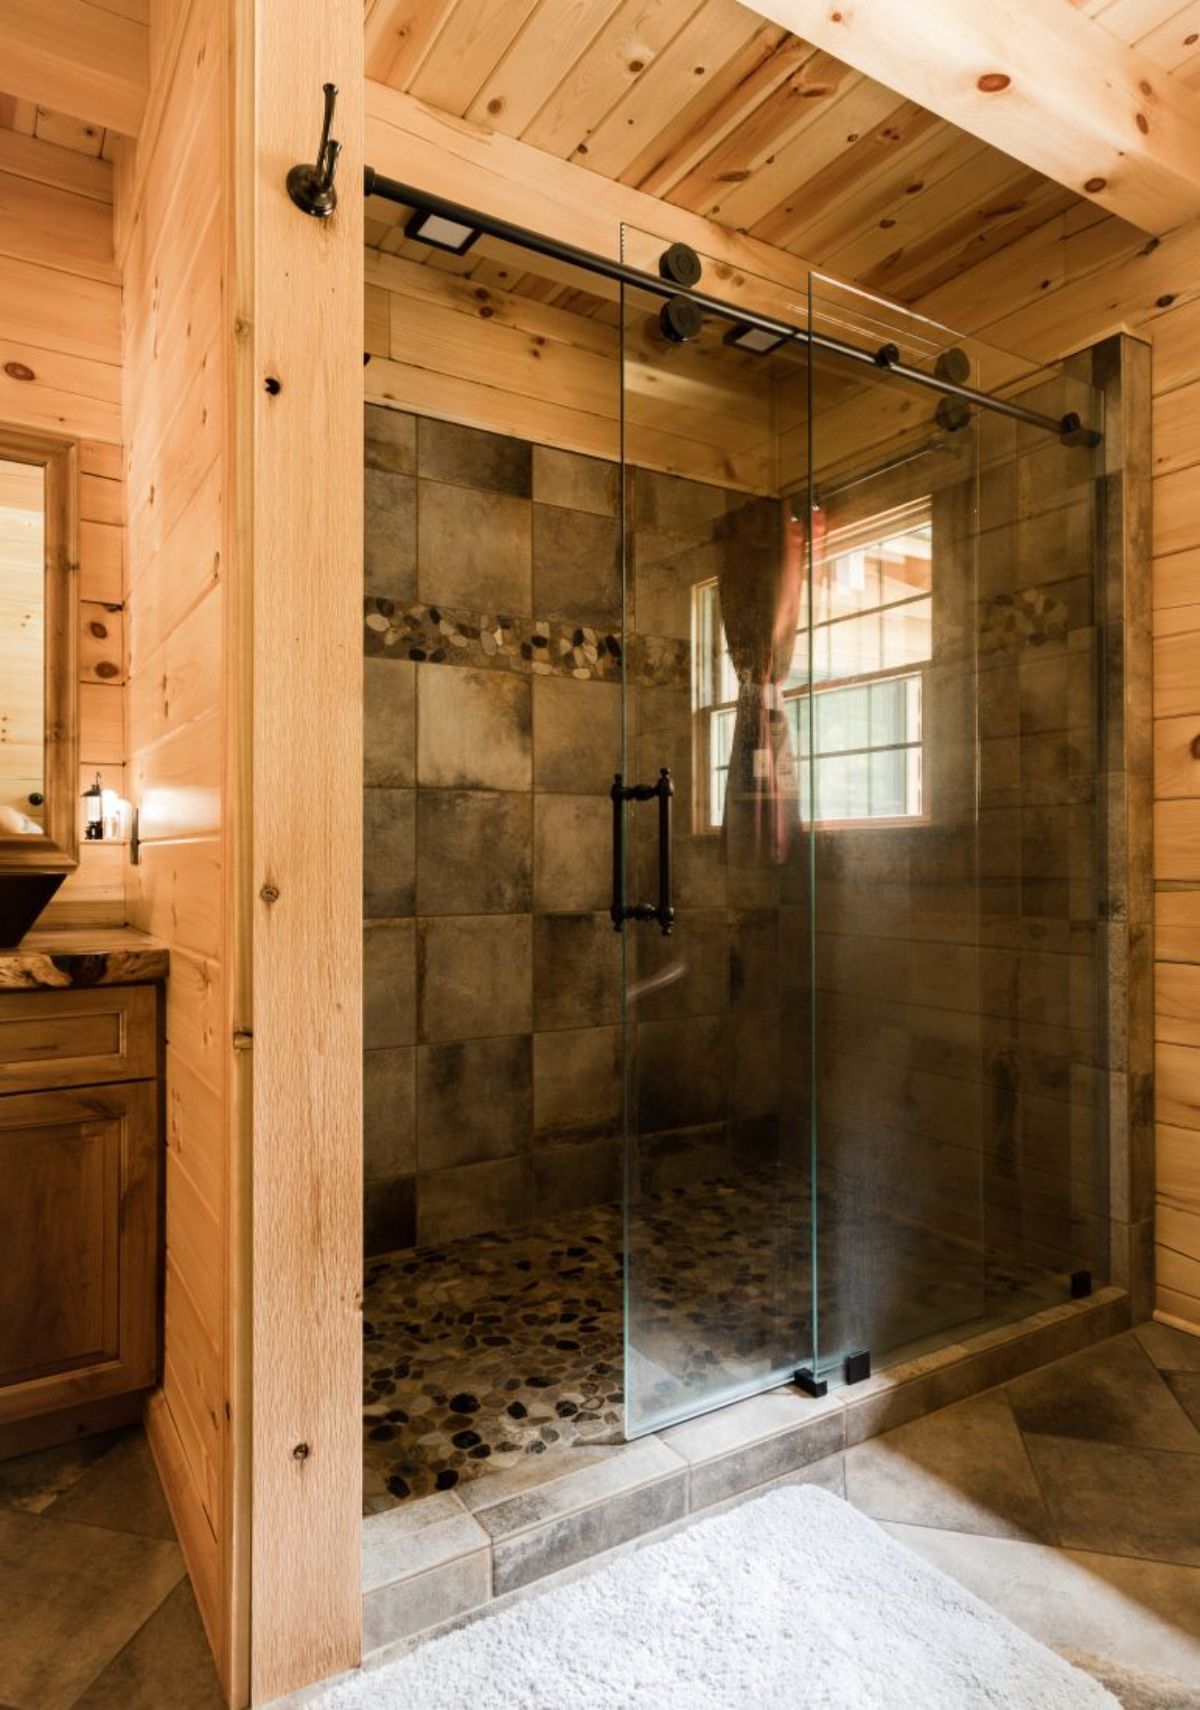 stone tiled shower with glass door in raw wood wall